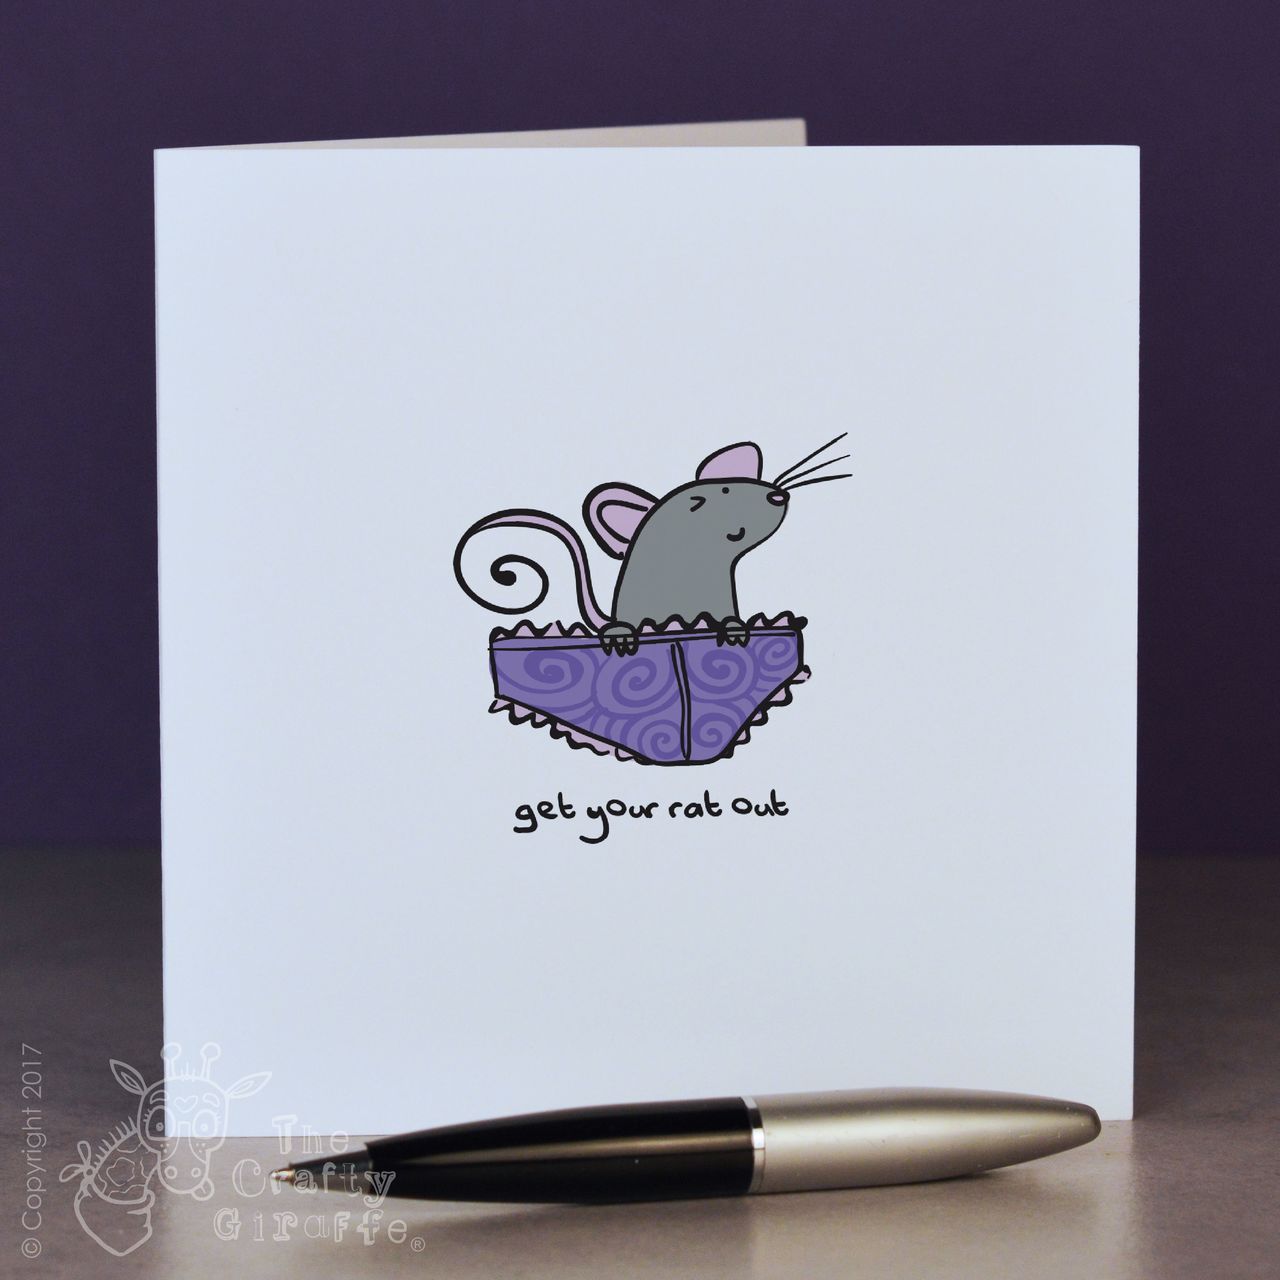 Get your rat out (knickers) Card